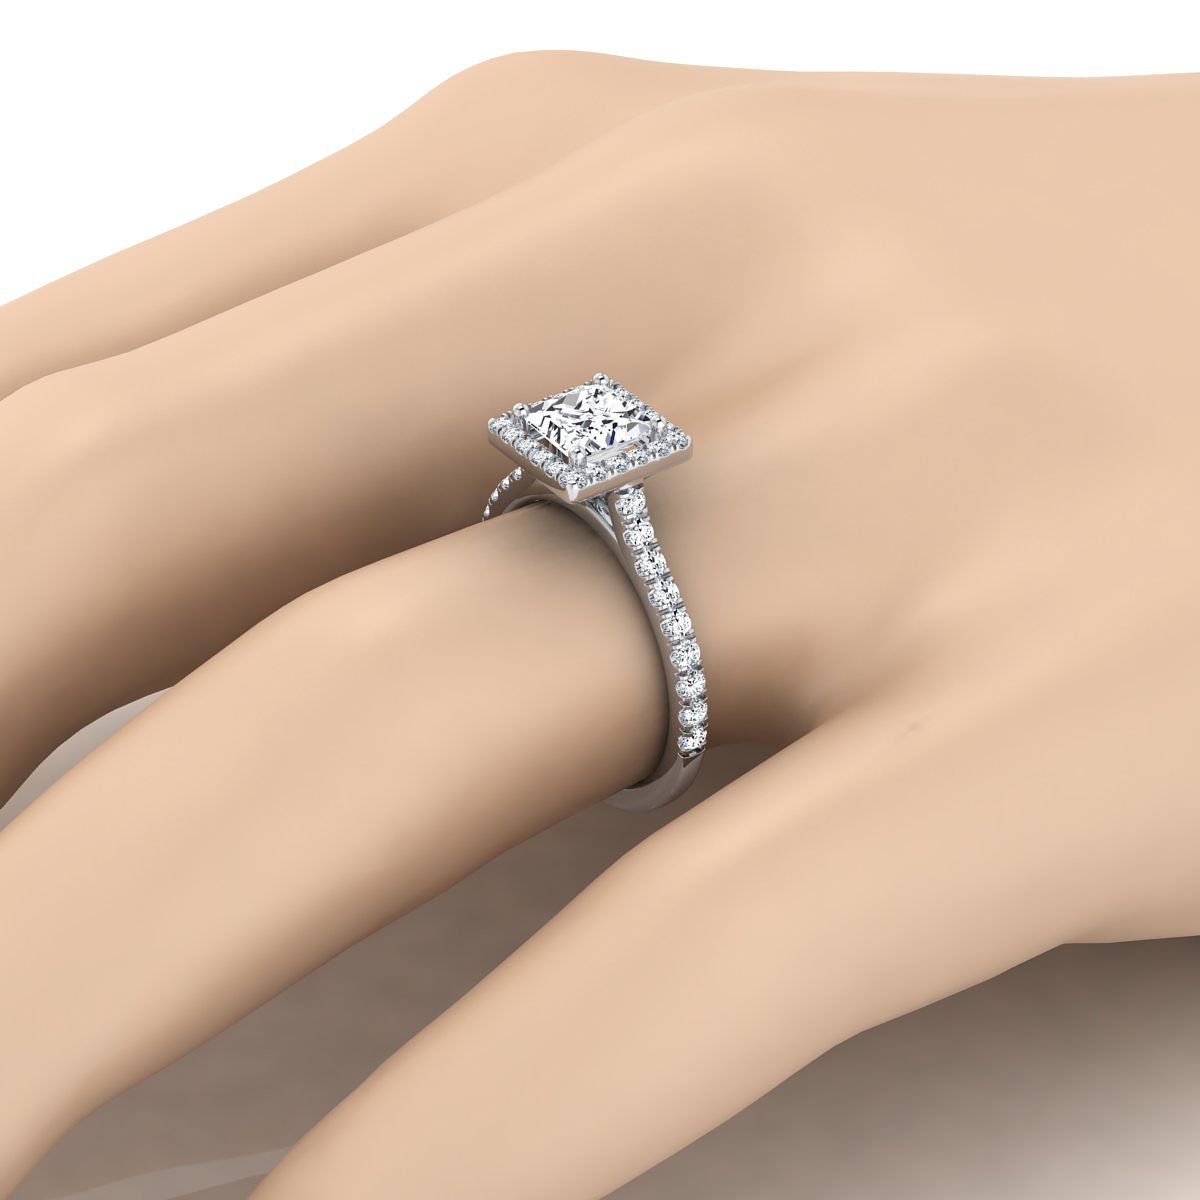 18K White Gold Princess Cut Diamond Shared Prong Halo with French Pave Engagement Ring -3/8ctw